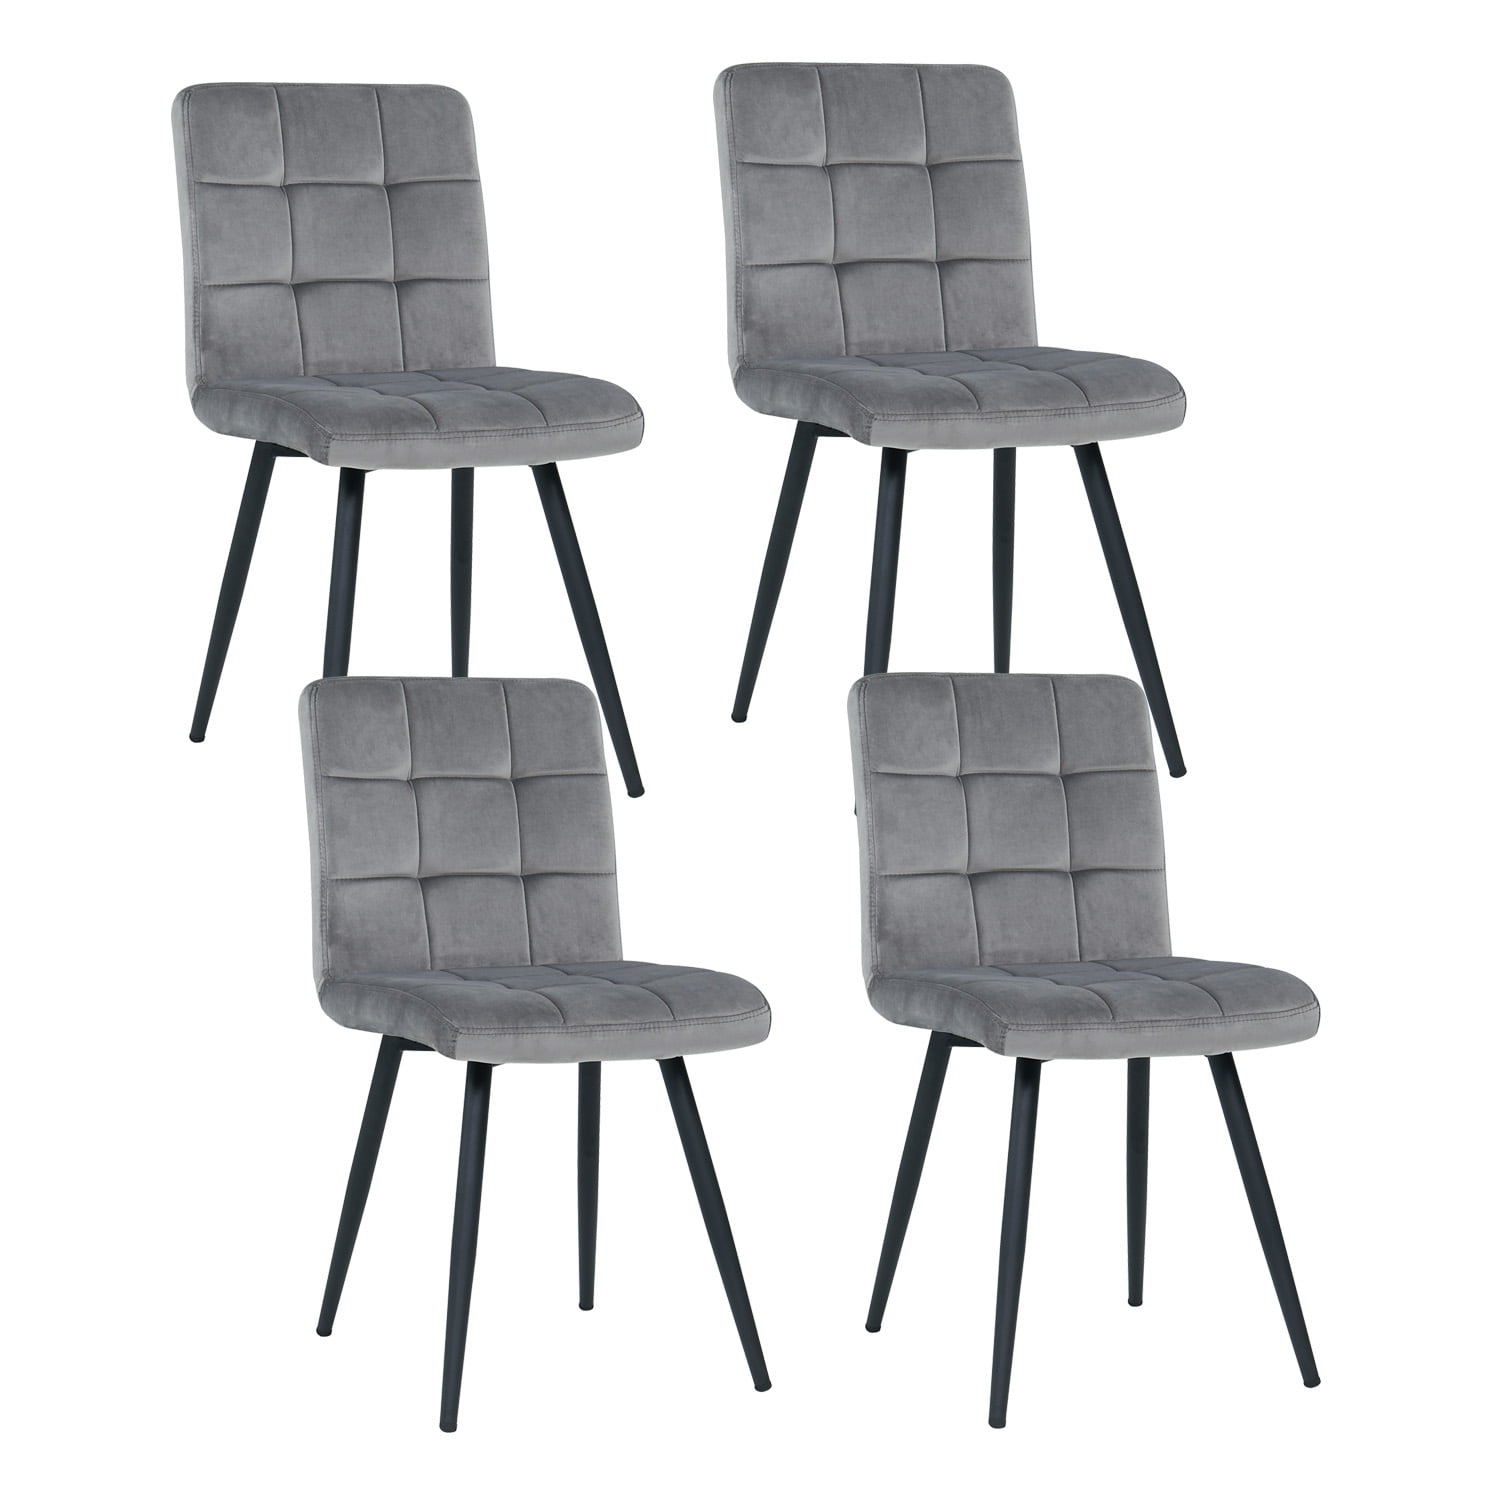 Duhome Dining Chairs Room, Grey Dining Chairs Set Of 4 With Arms